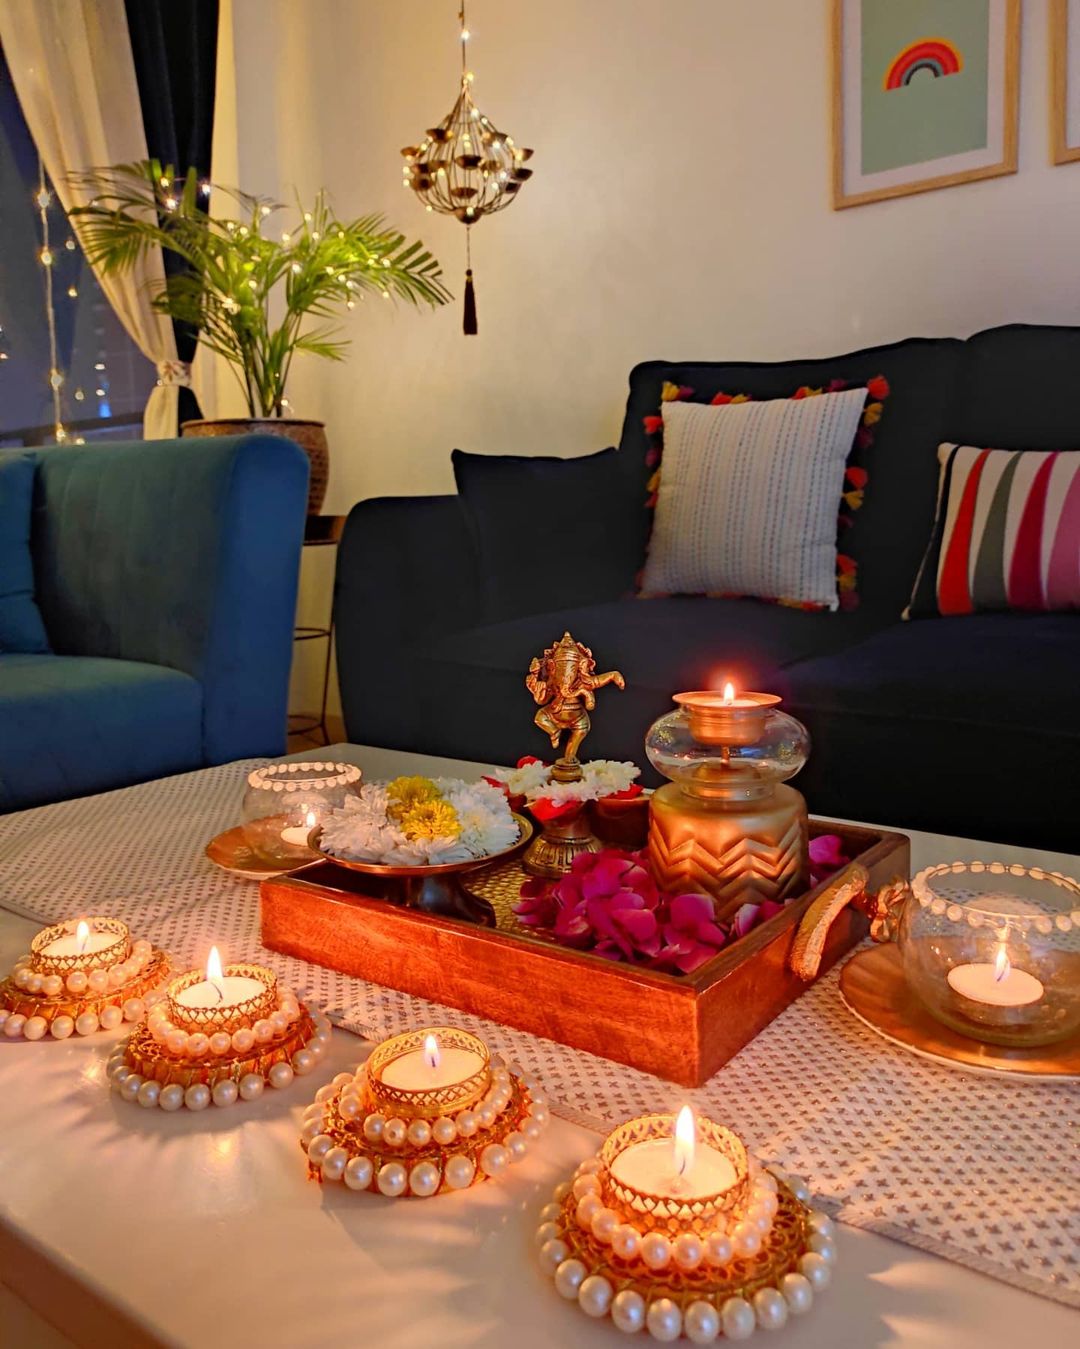 This Diwali, Light Up Your Interiors with Easy Decoration Ideas | One  Rajarhat